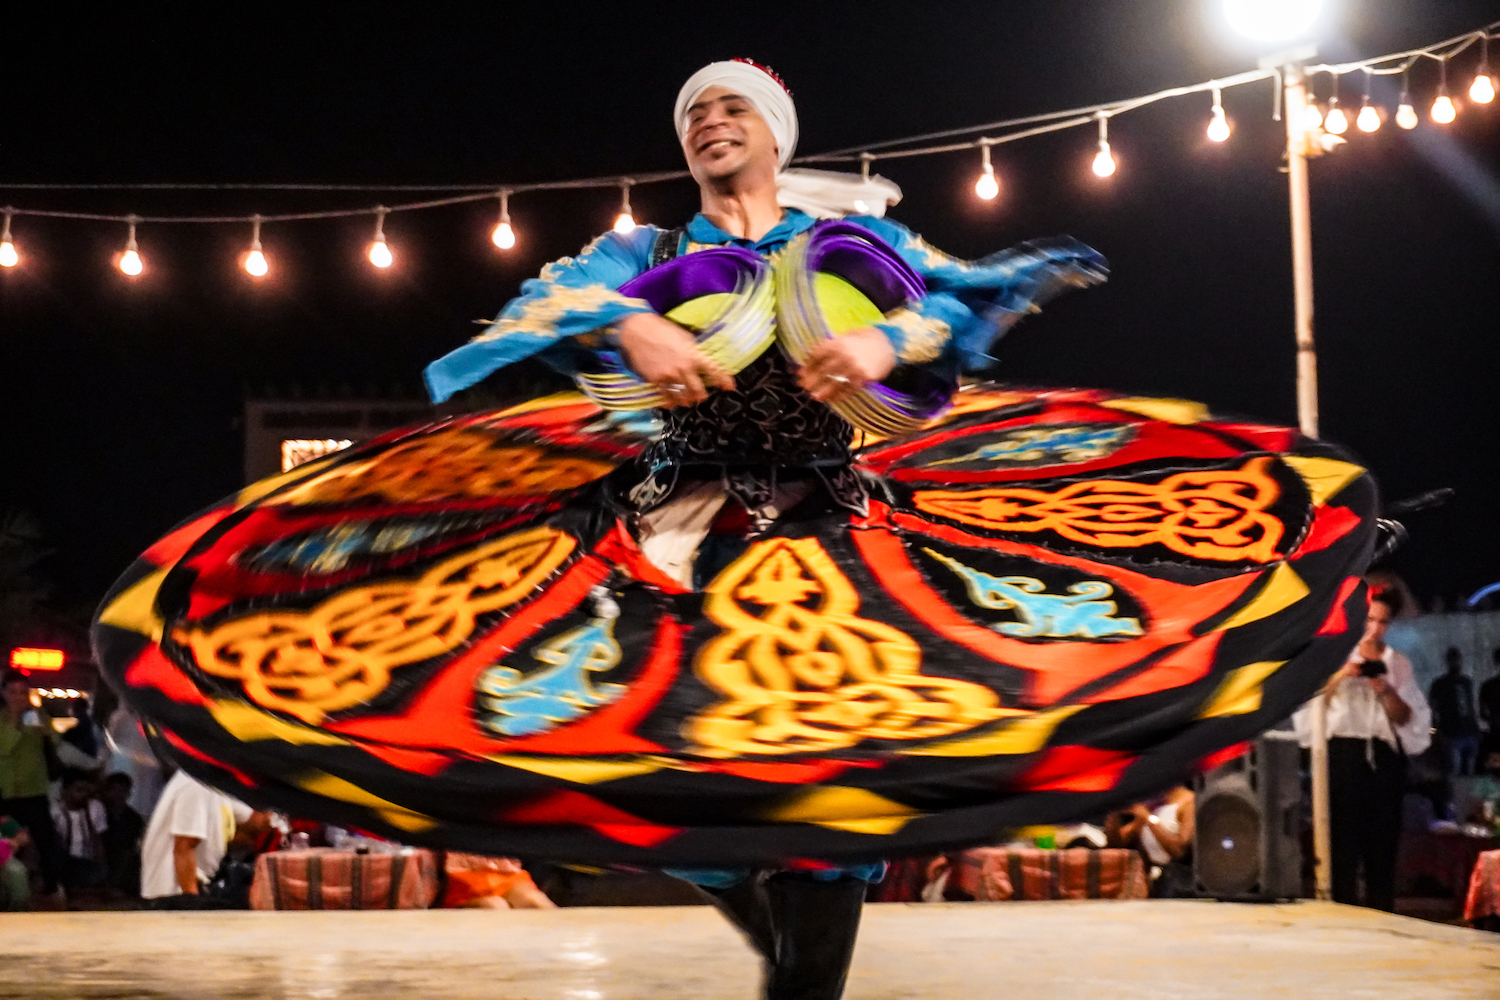 A tanoura dancer in red, yellow, orange, blue and black outfit spins and smiles.